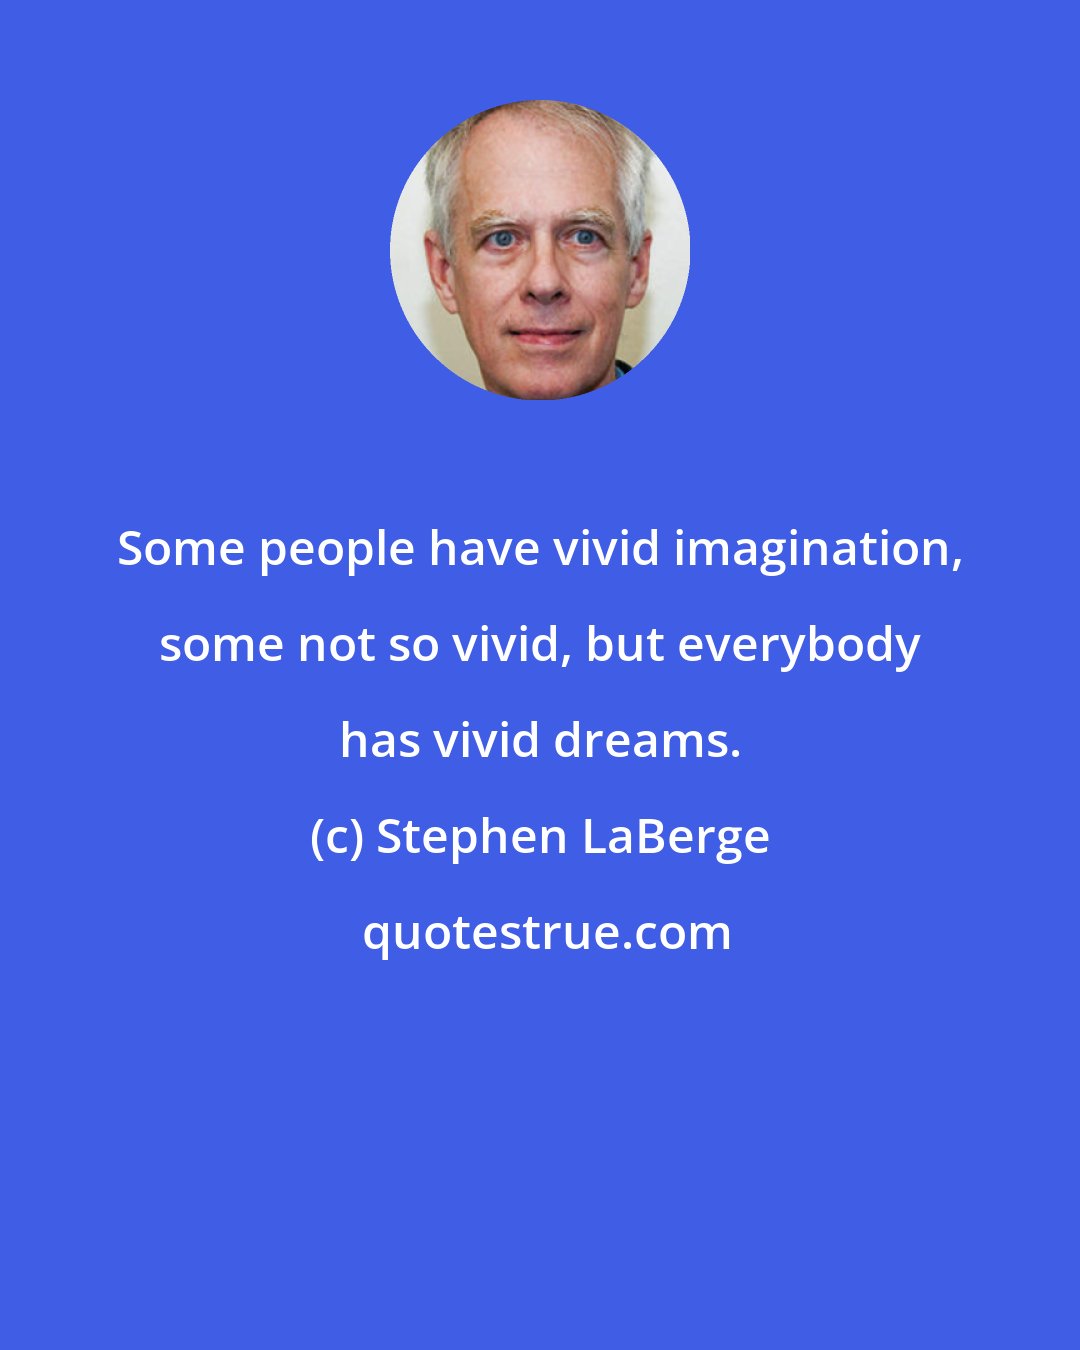 Stephen LaBerge: Some people have vivid imagination, some not so vivid, but everybody has vivid dreams.